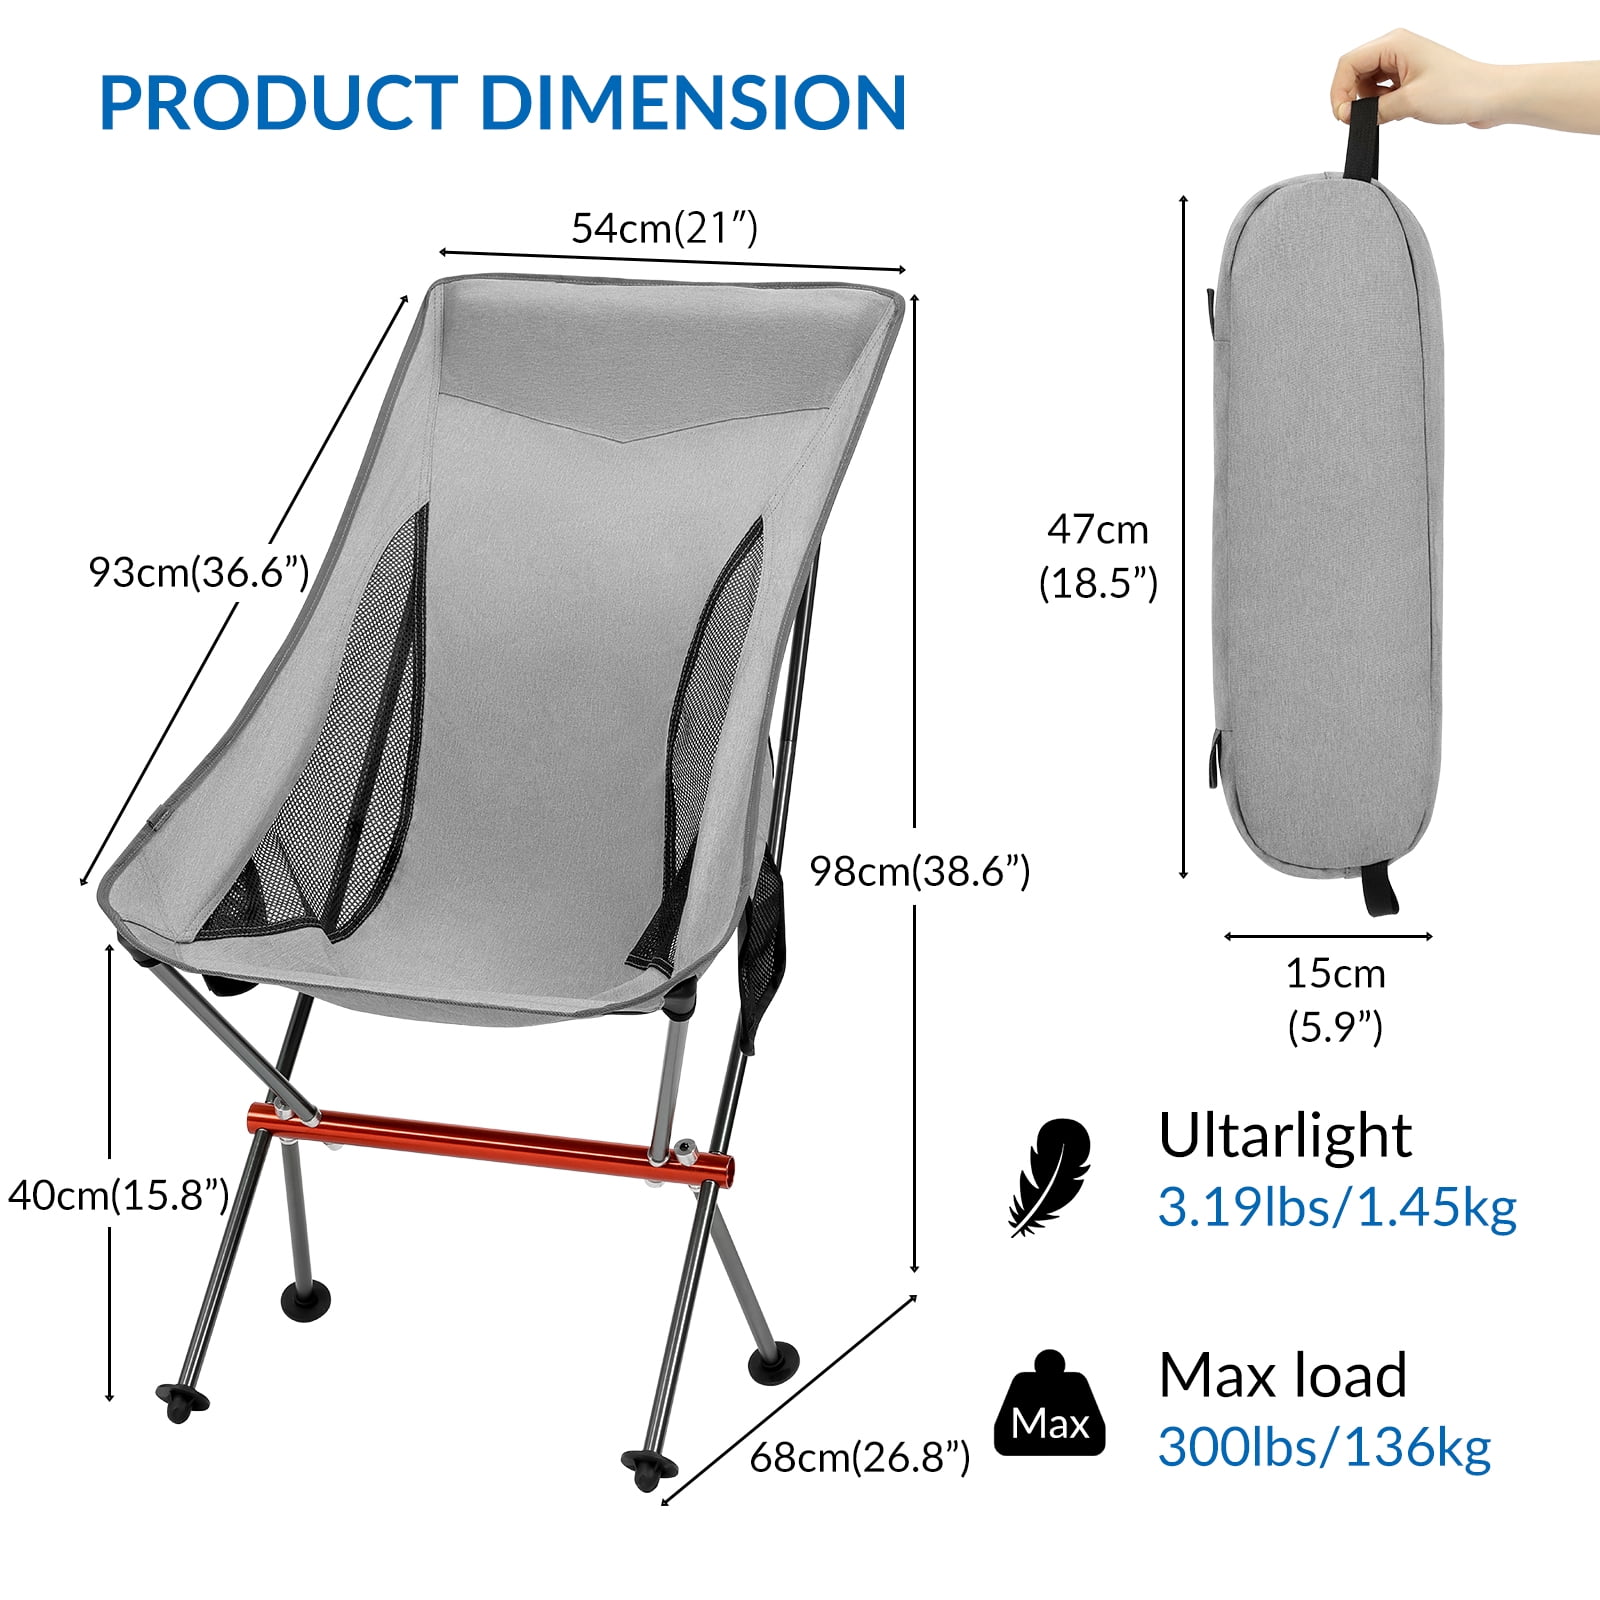 SHALLWE Ultralight High Back Folding Camping Chair, Upgraded All Aluminum  Frame for Adult, Built-in Pillow, Side Pocket & Carry Bag, Compact & Heavy  Duty for Outdoor Backpacking(Silver) 